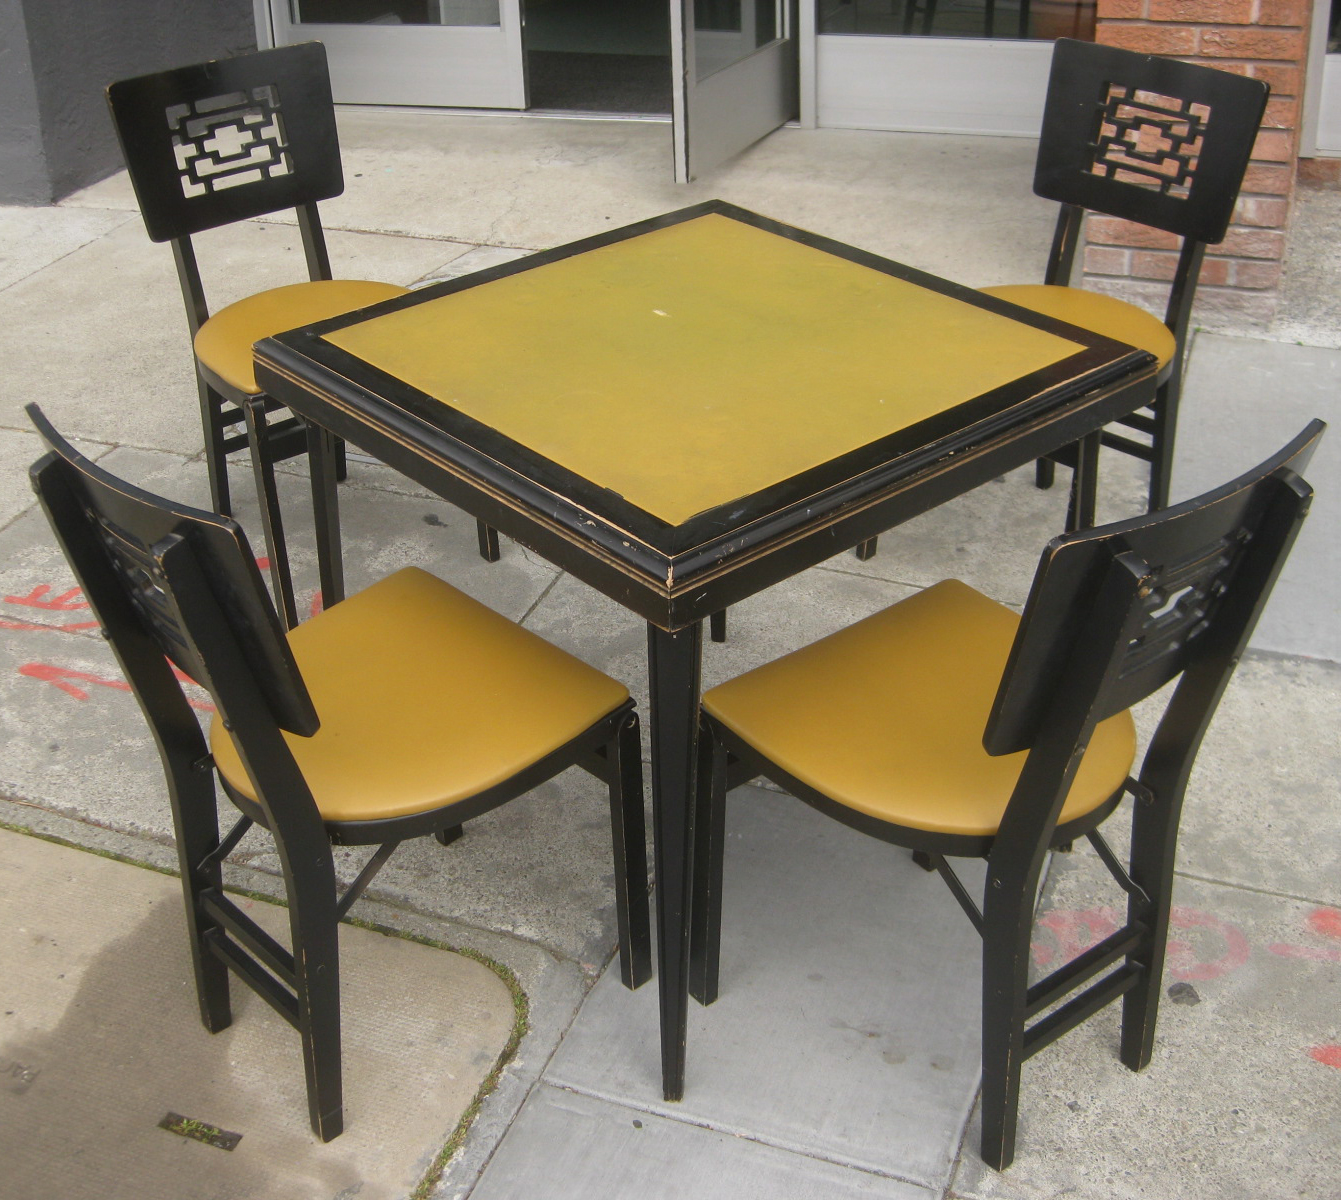 UHURU FURNITURE & COLLECTIBLES: SOLD - Fancy Folding Table and 4 Chairs